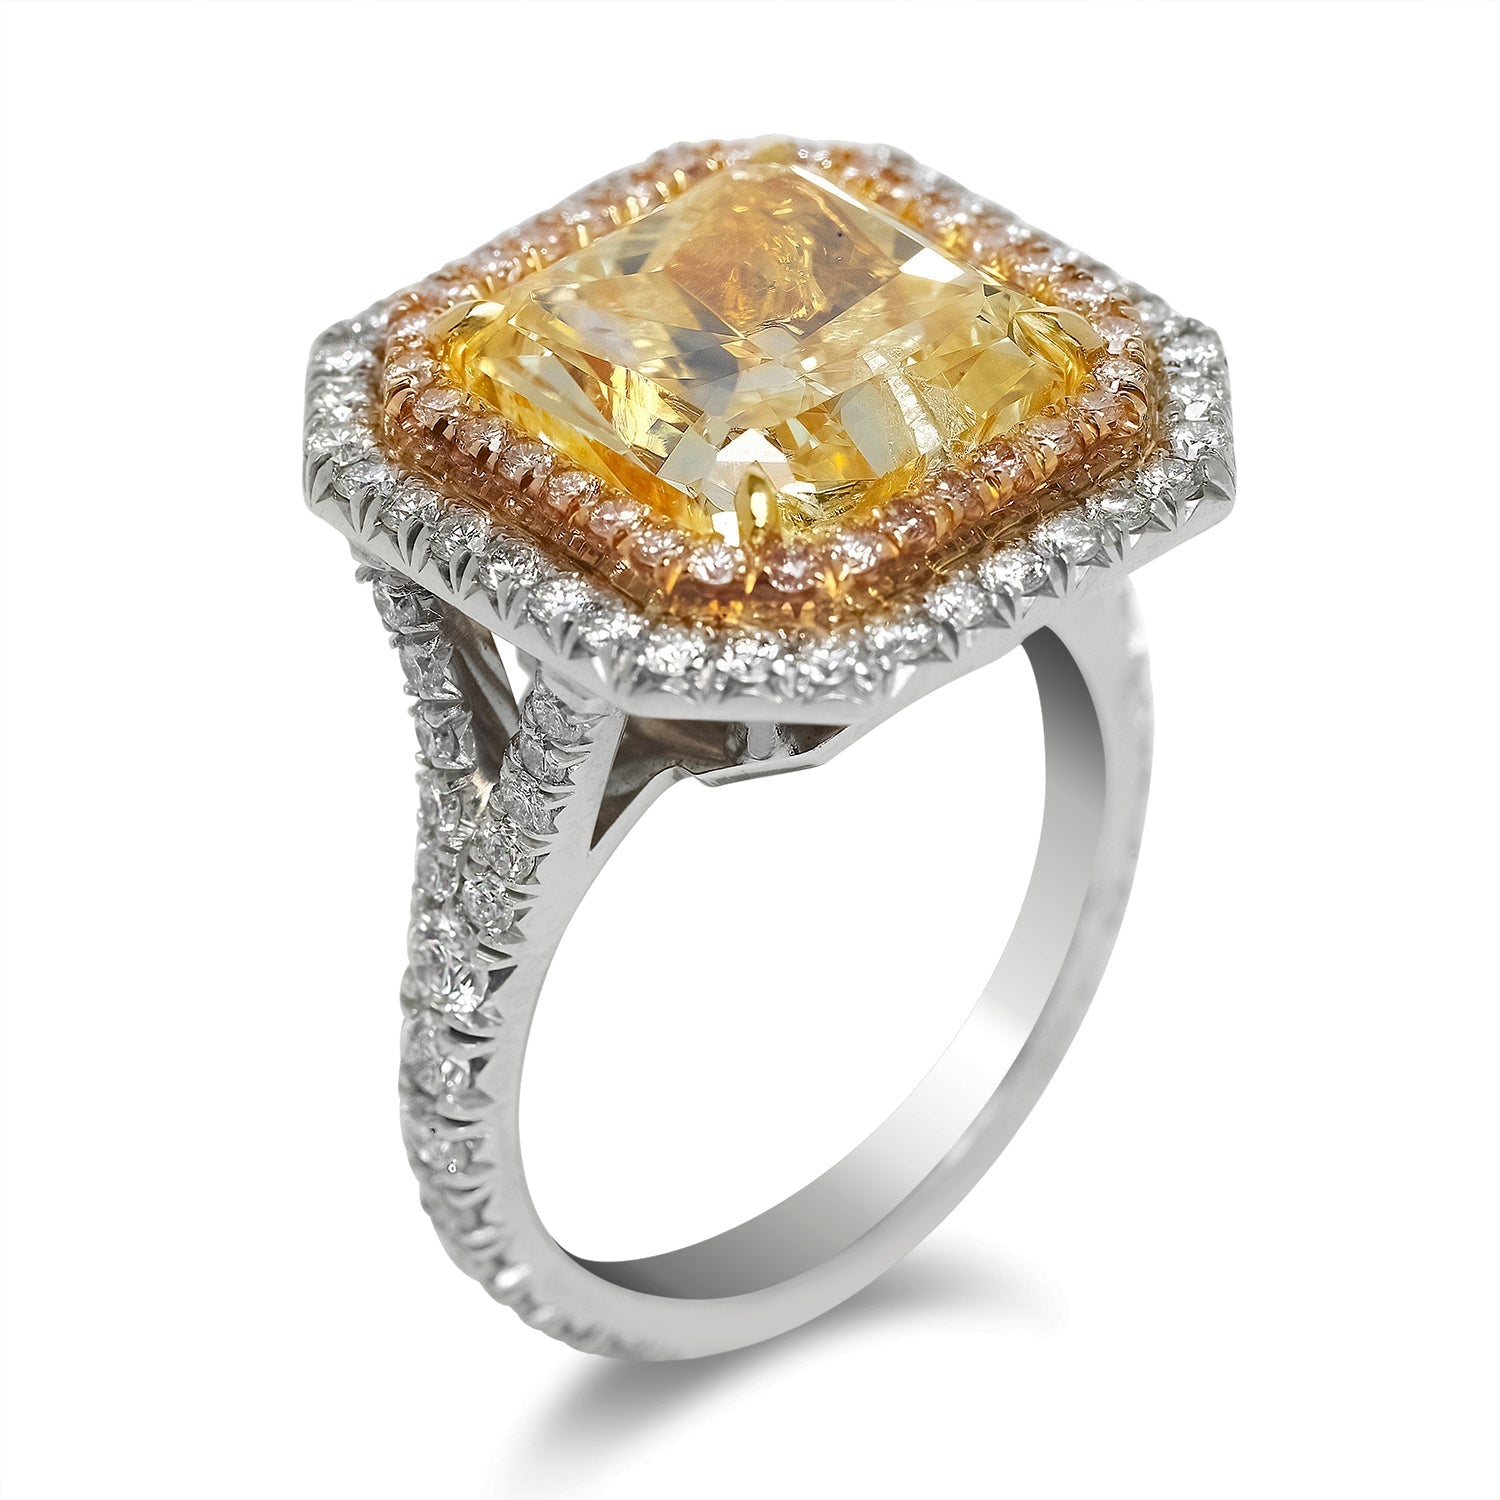 Yellow Diamond Ring Radiant Cut 9 Carat Halo Ring in Platinum & 18K Gold Side View